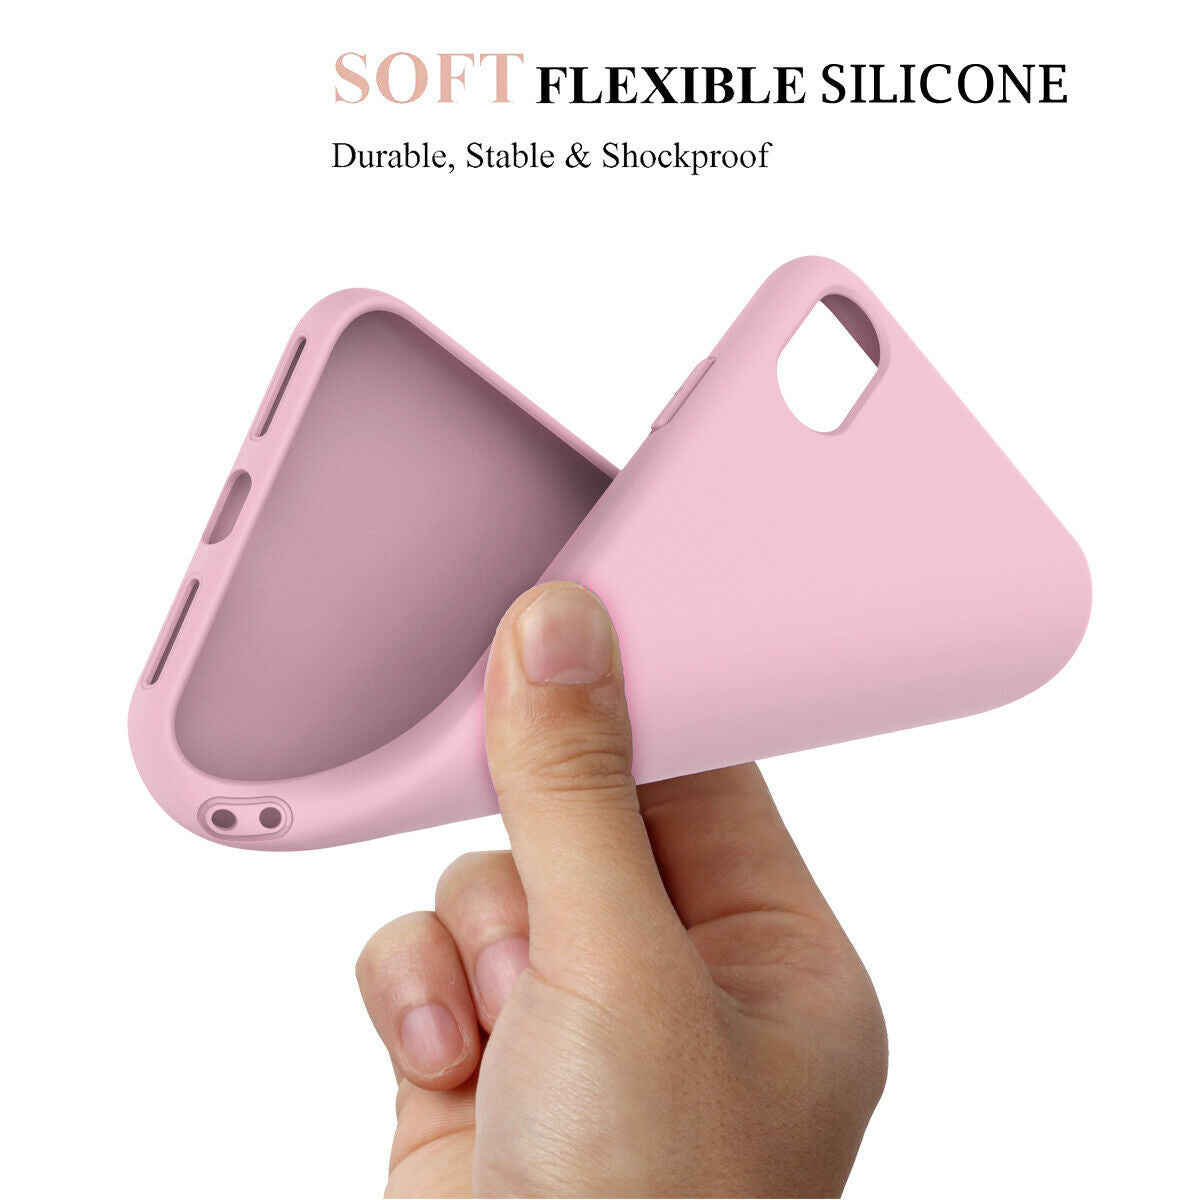 Silicone Case Soft Cover for iPhone